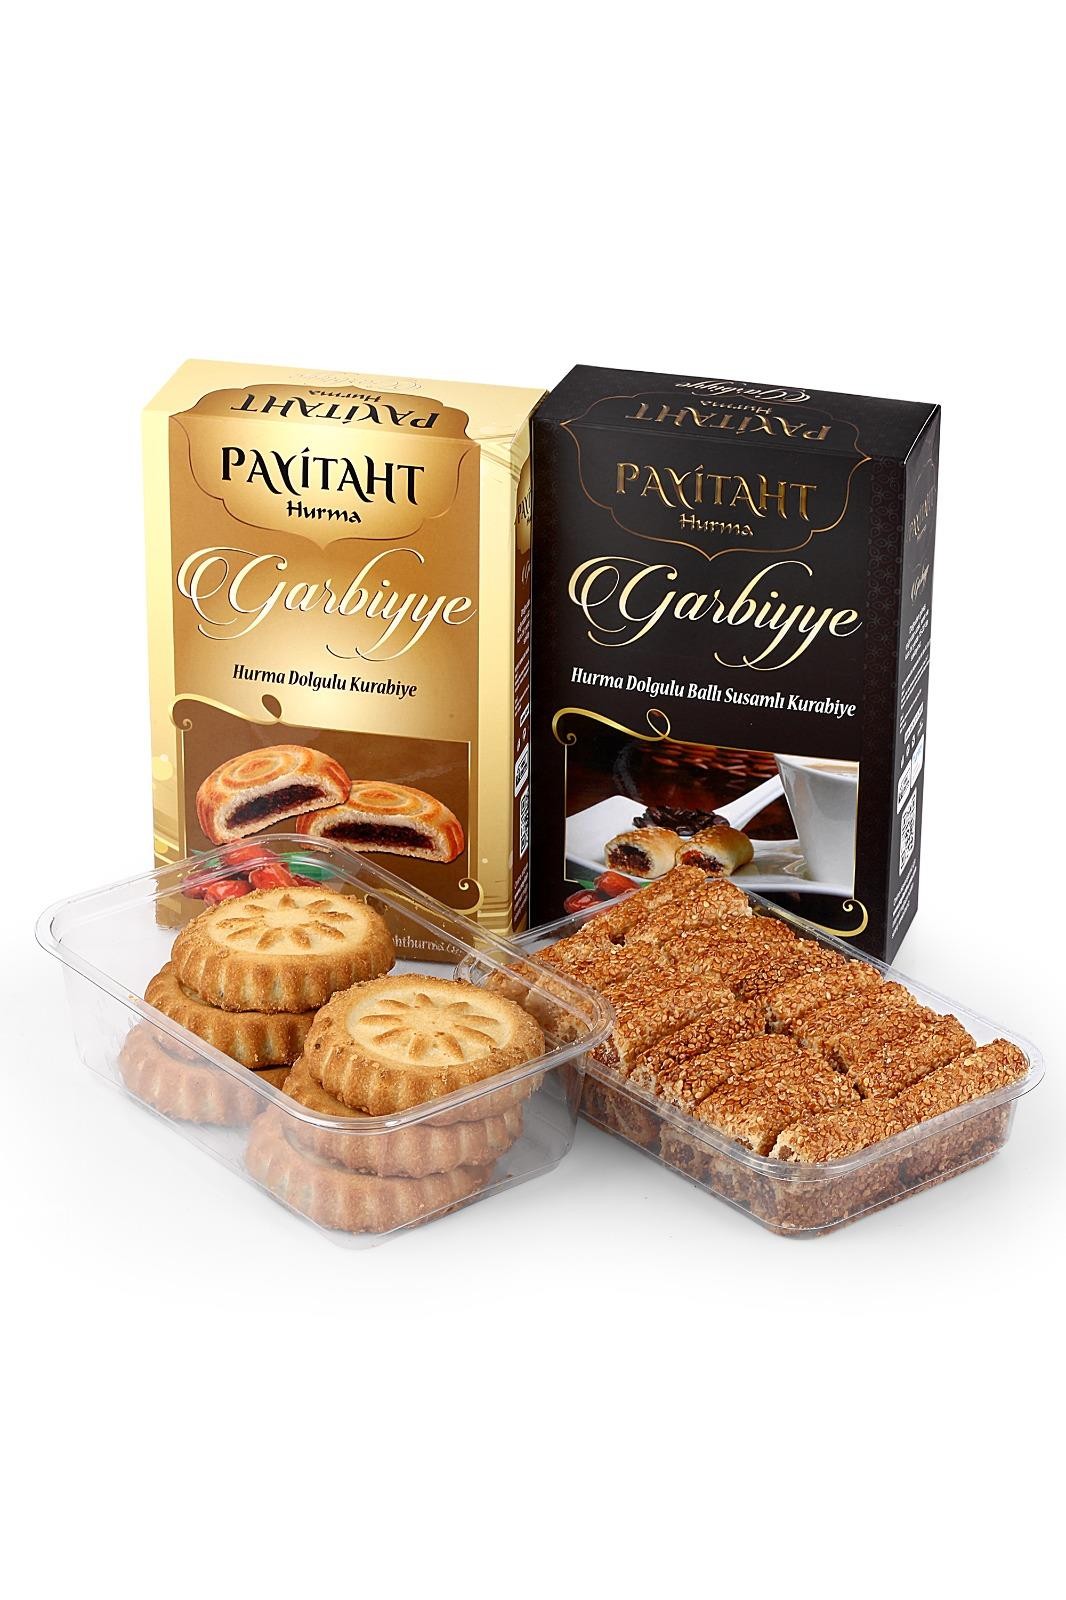 PAYITAHT HURMA-Date-Filled Cookies and Date-Filled - Honey - Sesame - Cookie 2 Pack - 1kg